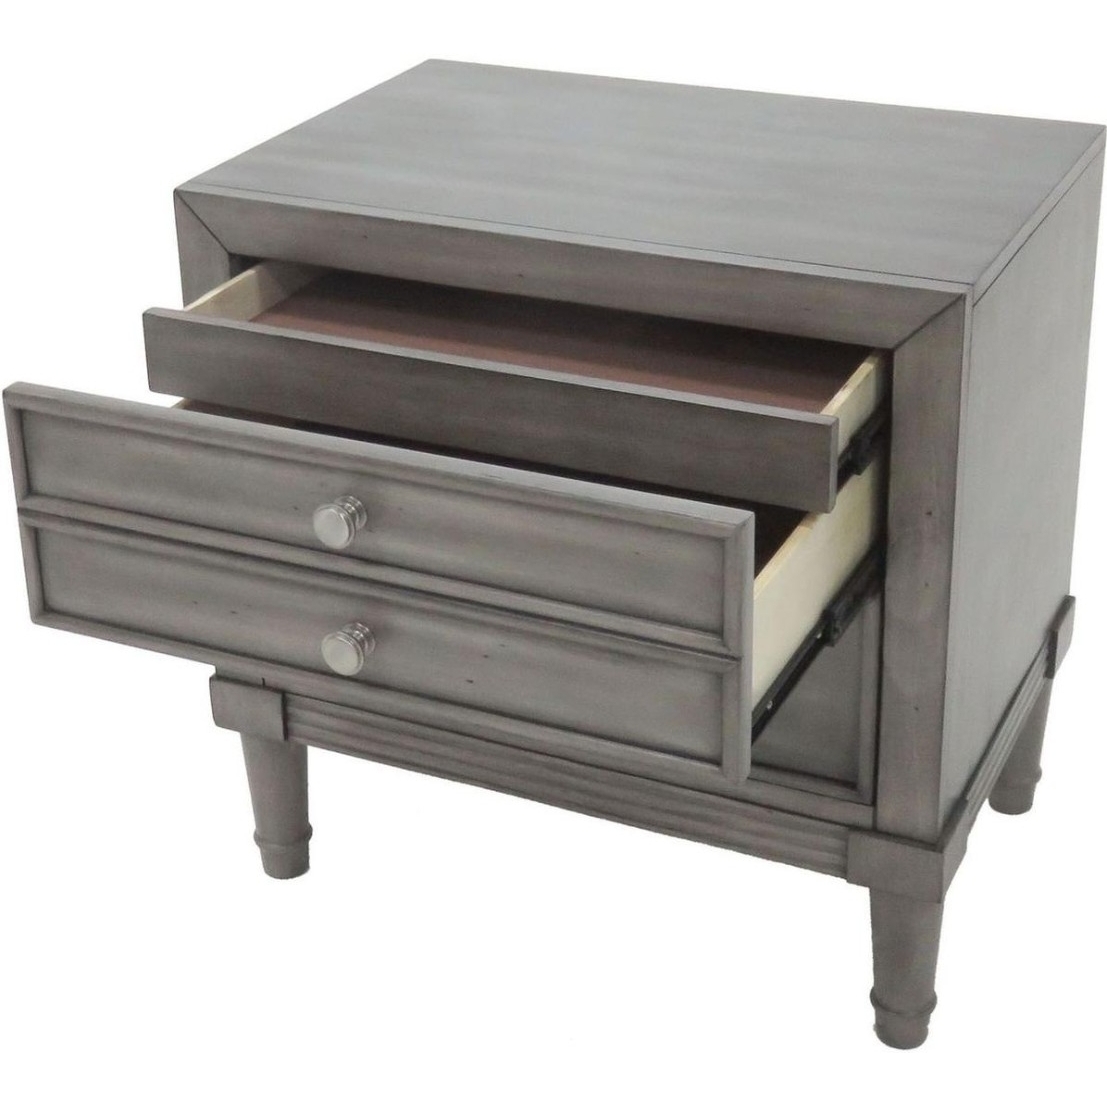 Finely Designed Wooden Night Stand With Drawers, Gray- Saltoro Sherpi